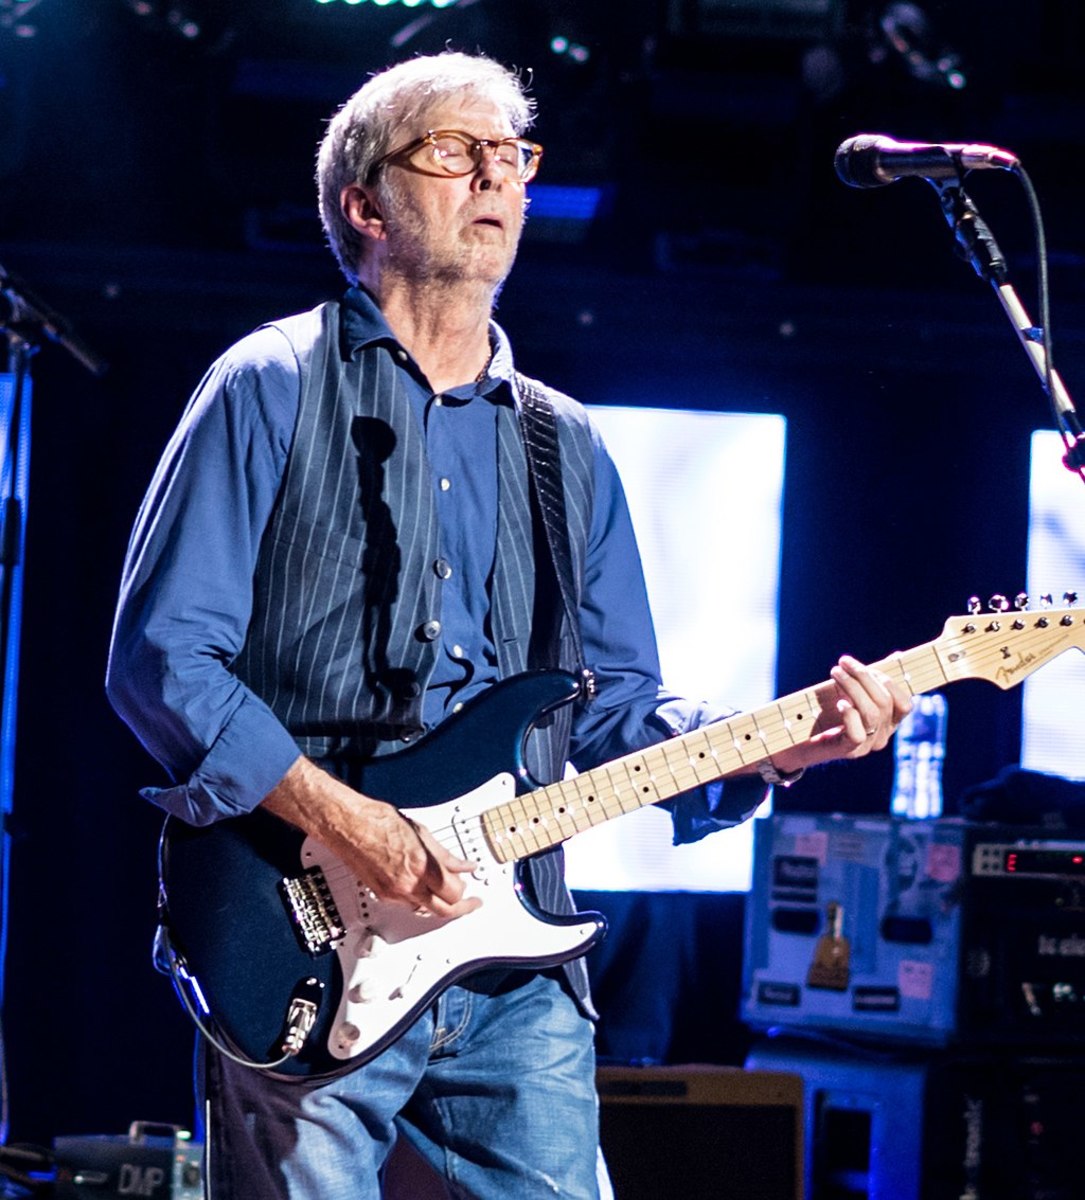 suggested-set-list-for-eric-clapton-at-unvaccinated-concerts